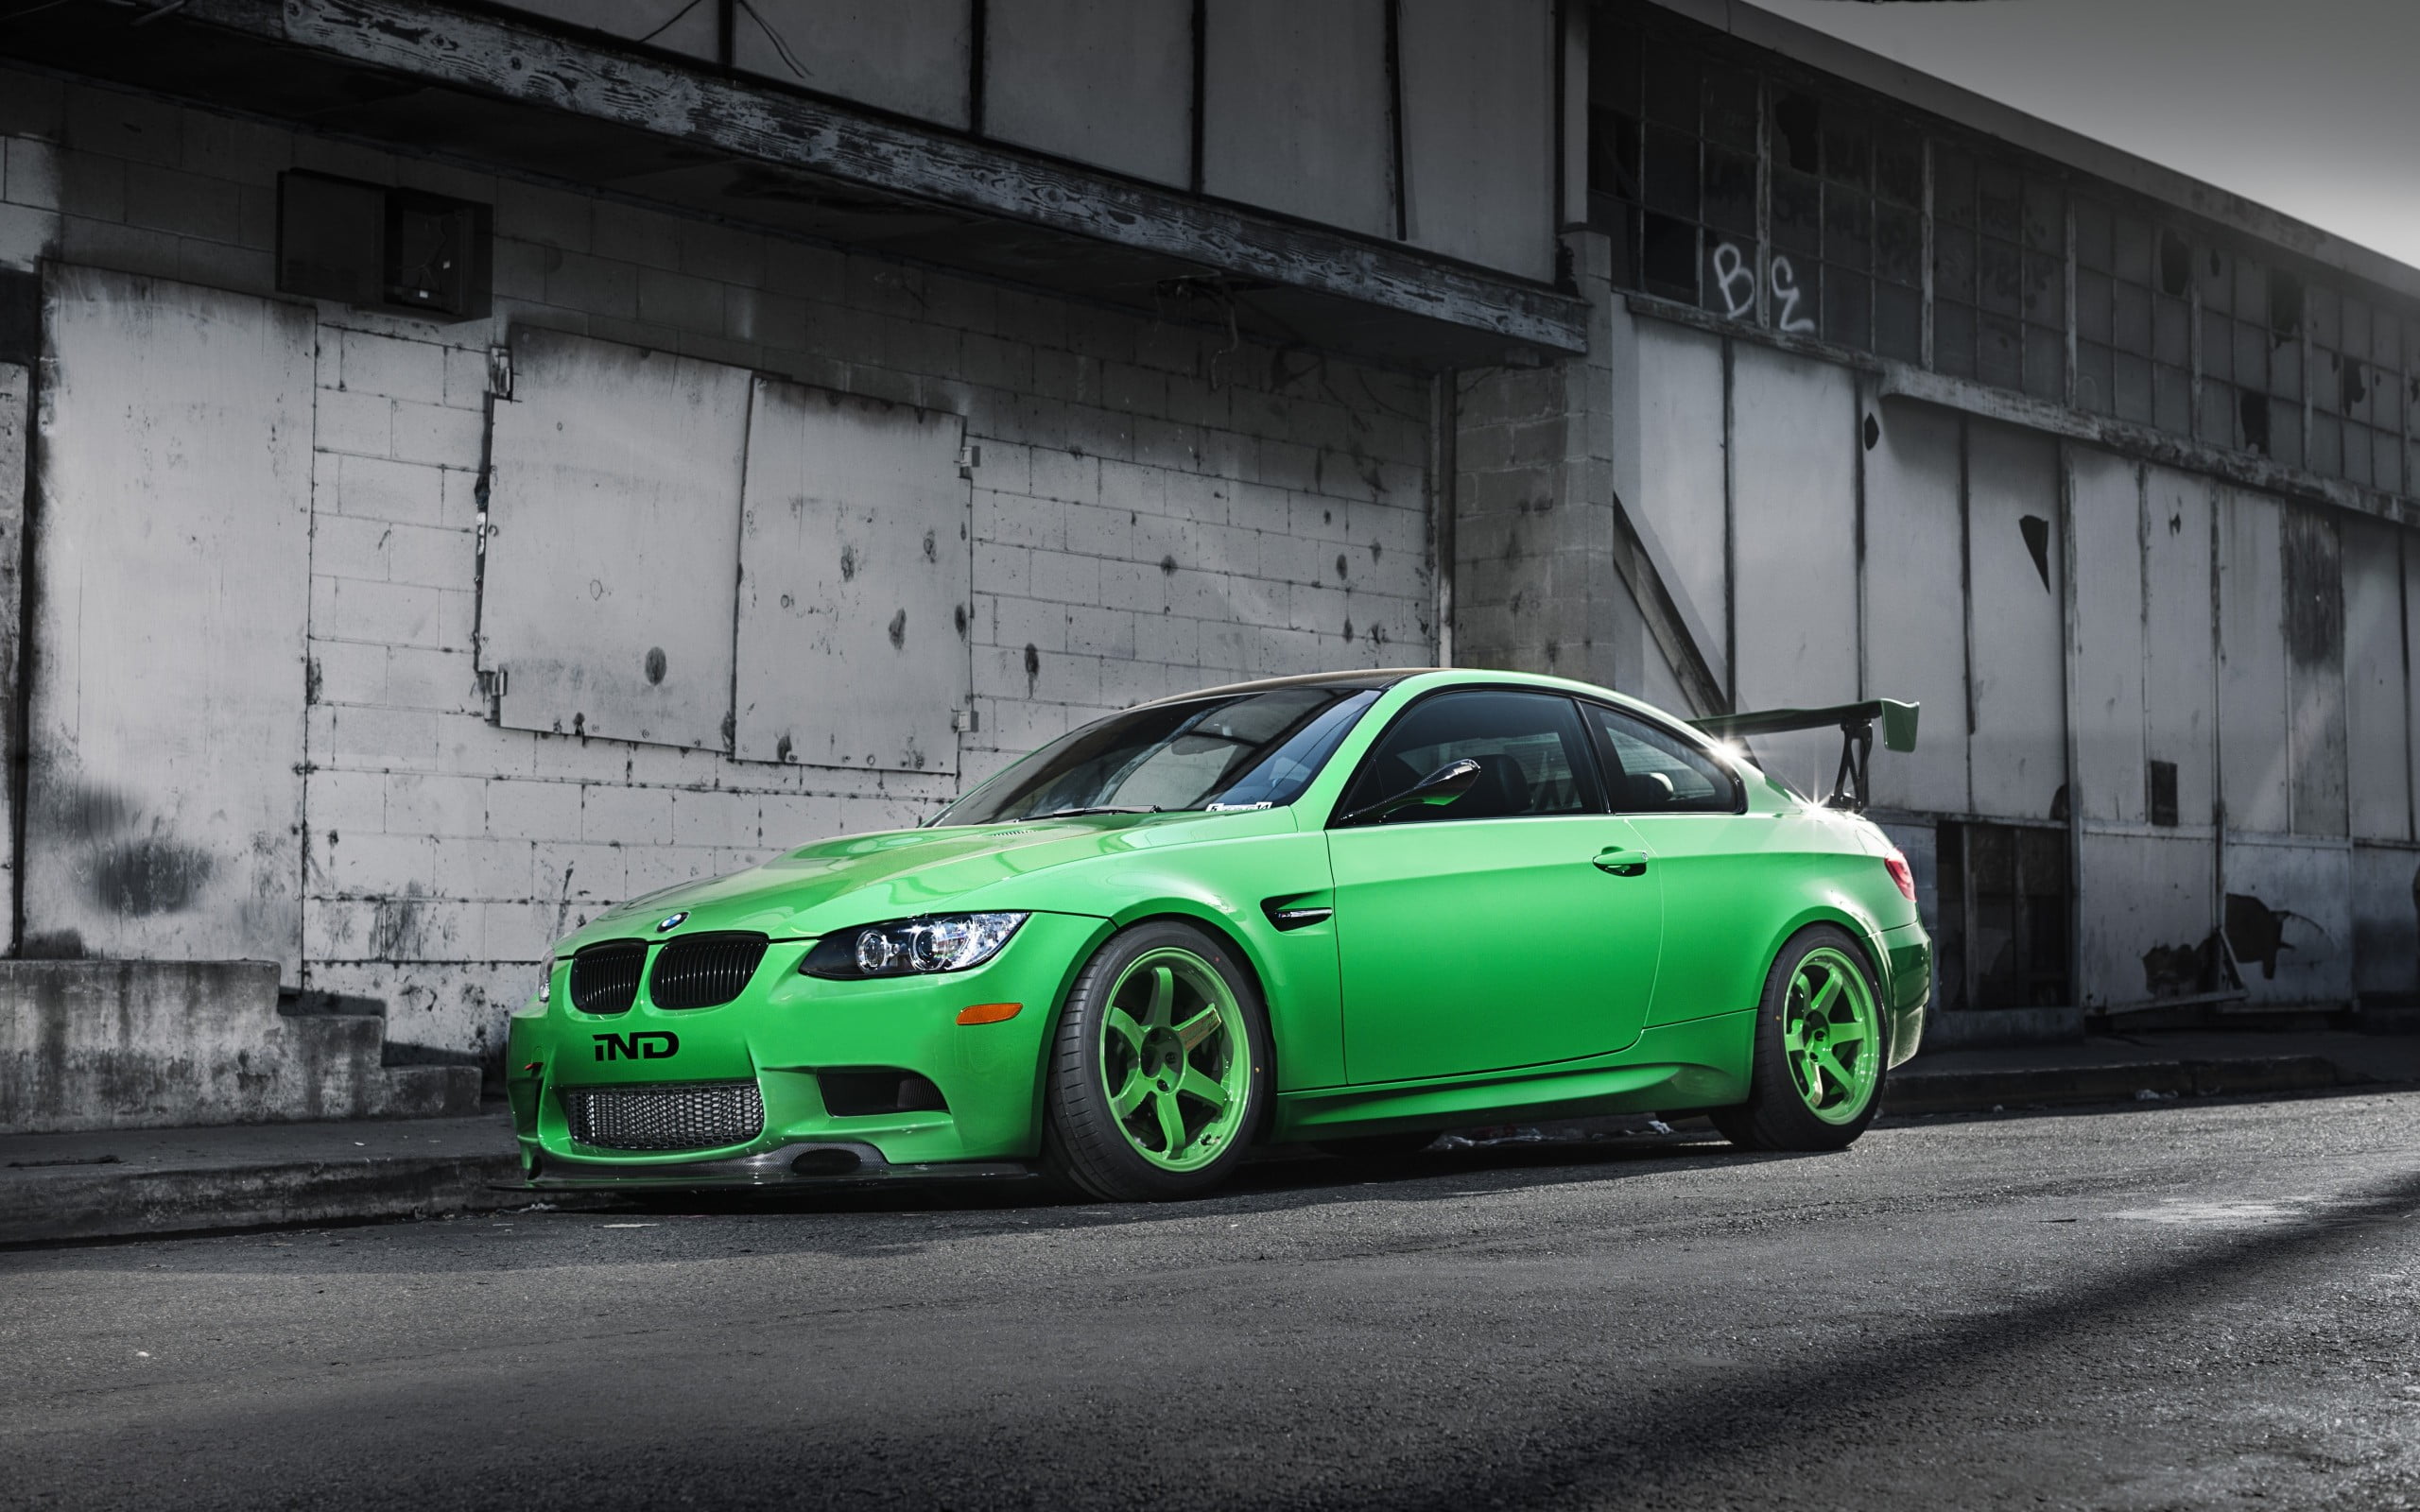 green BMW coupe, car, rims, selective coloring, mode of transportation